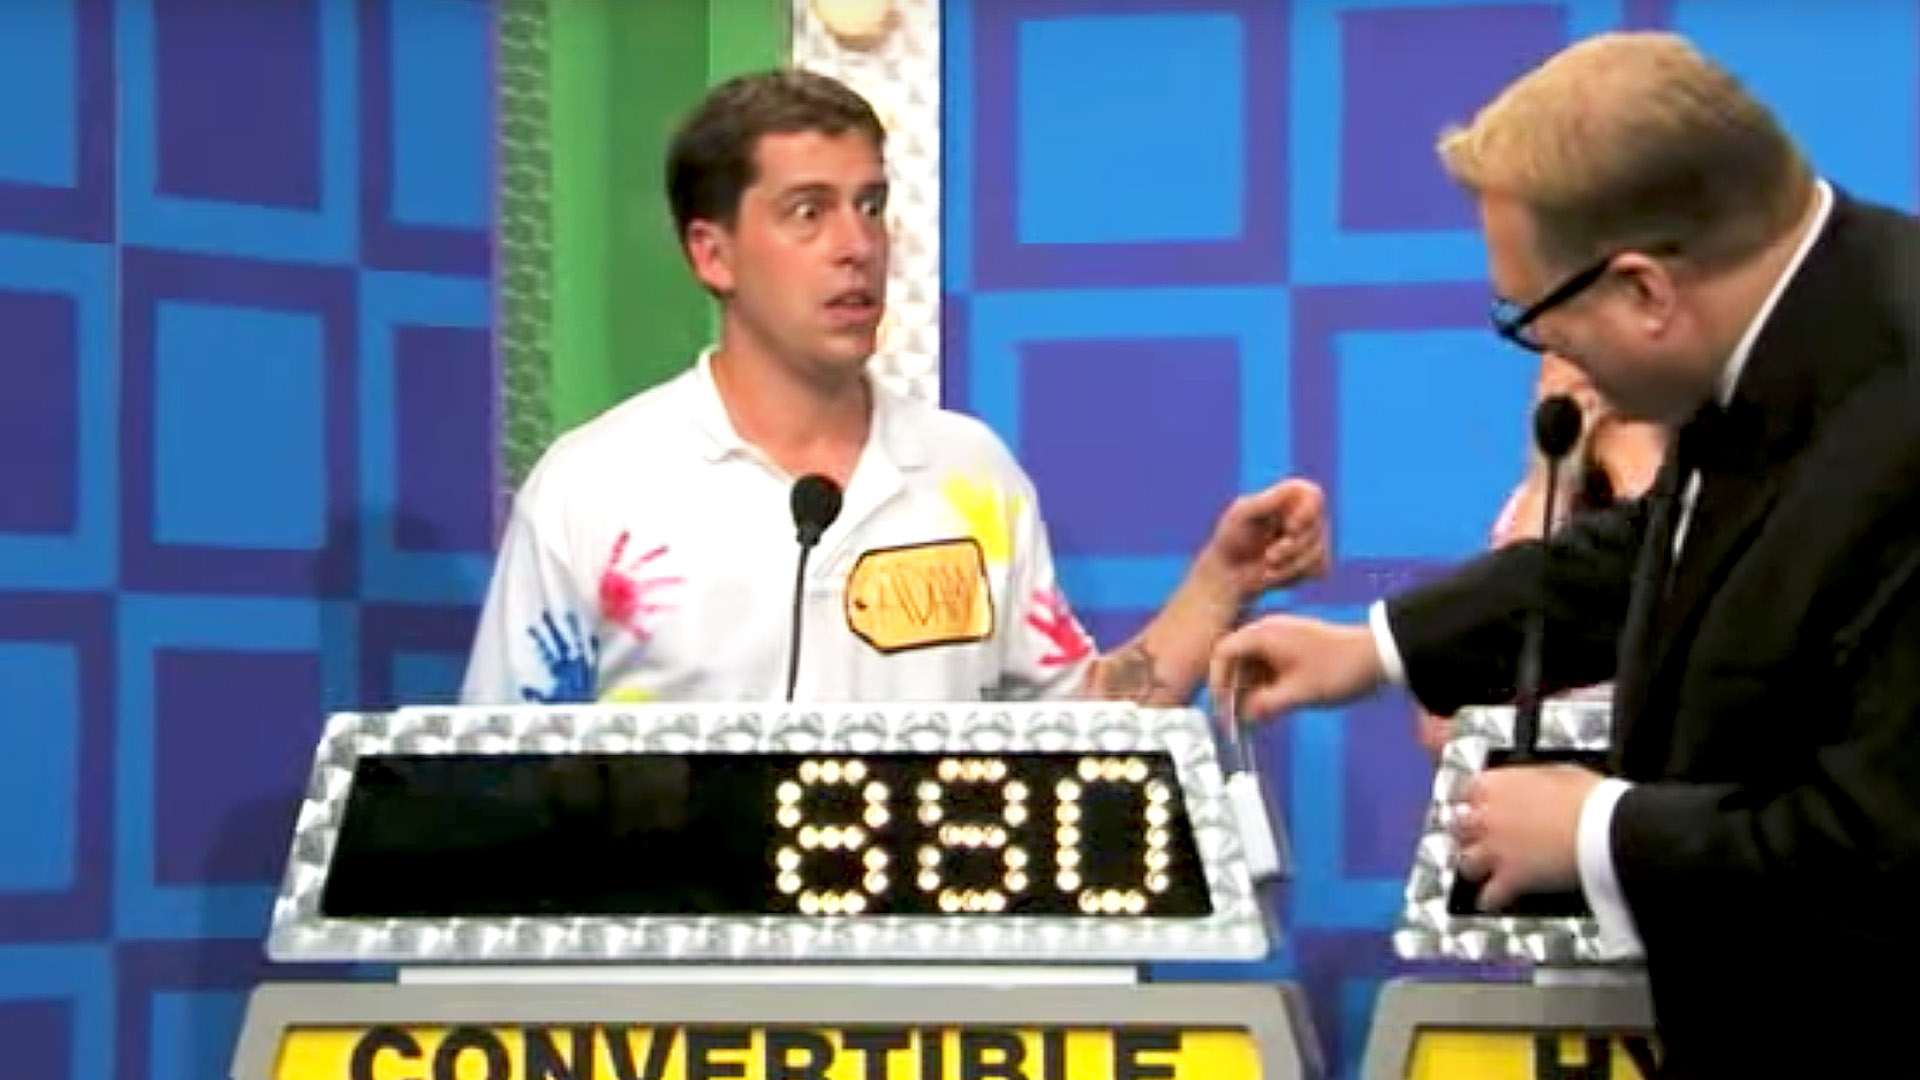 A Price is Right contestant cracked the Top 10 highest winnings of all time.